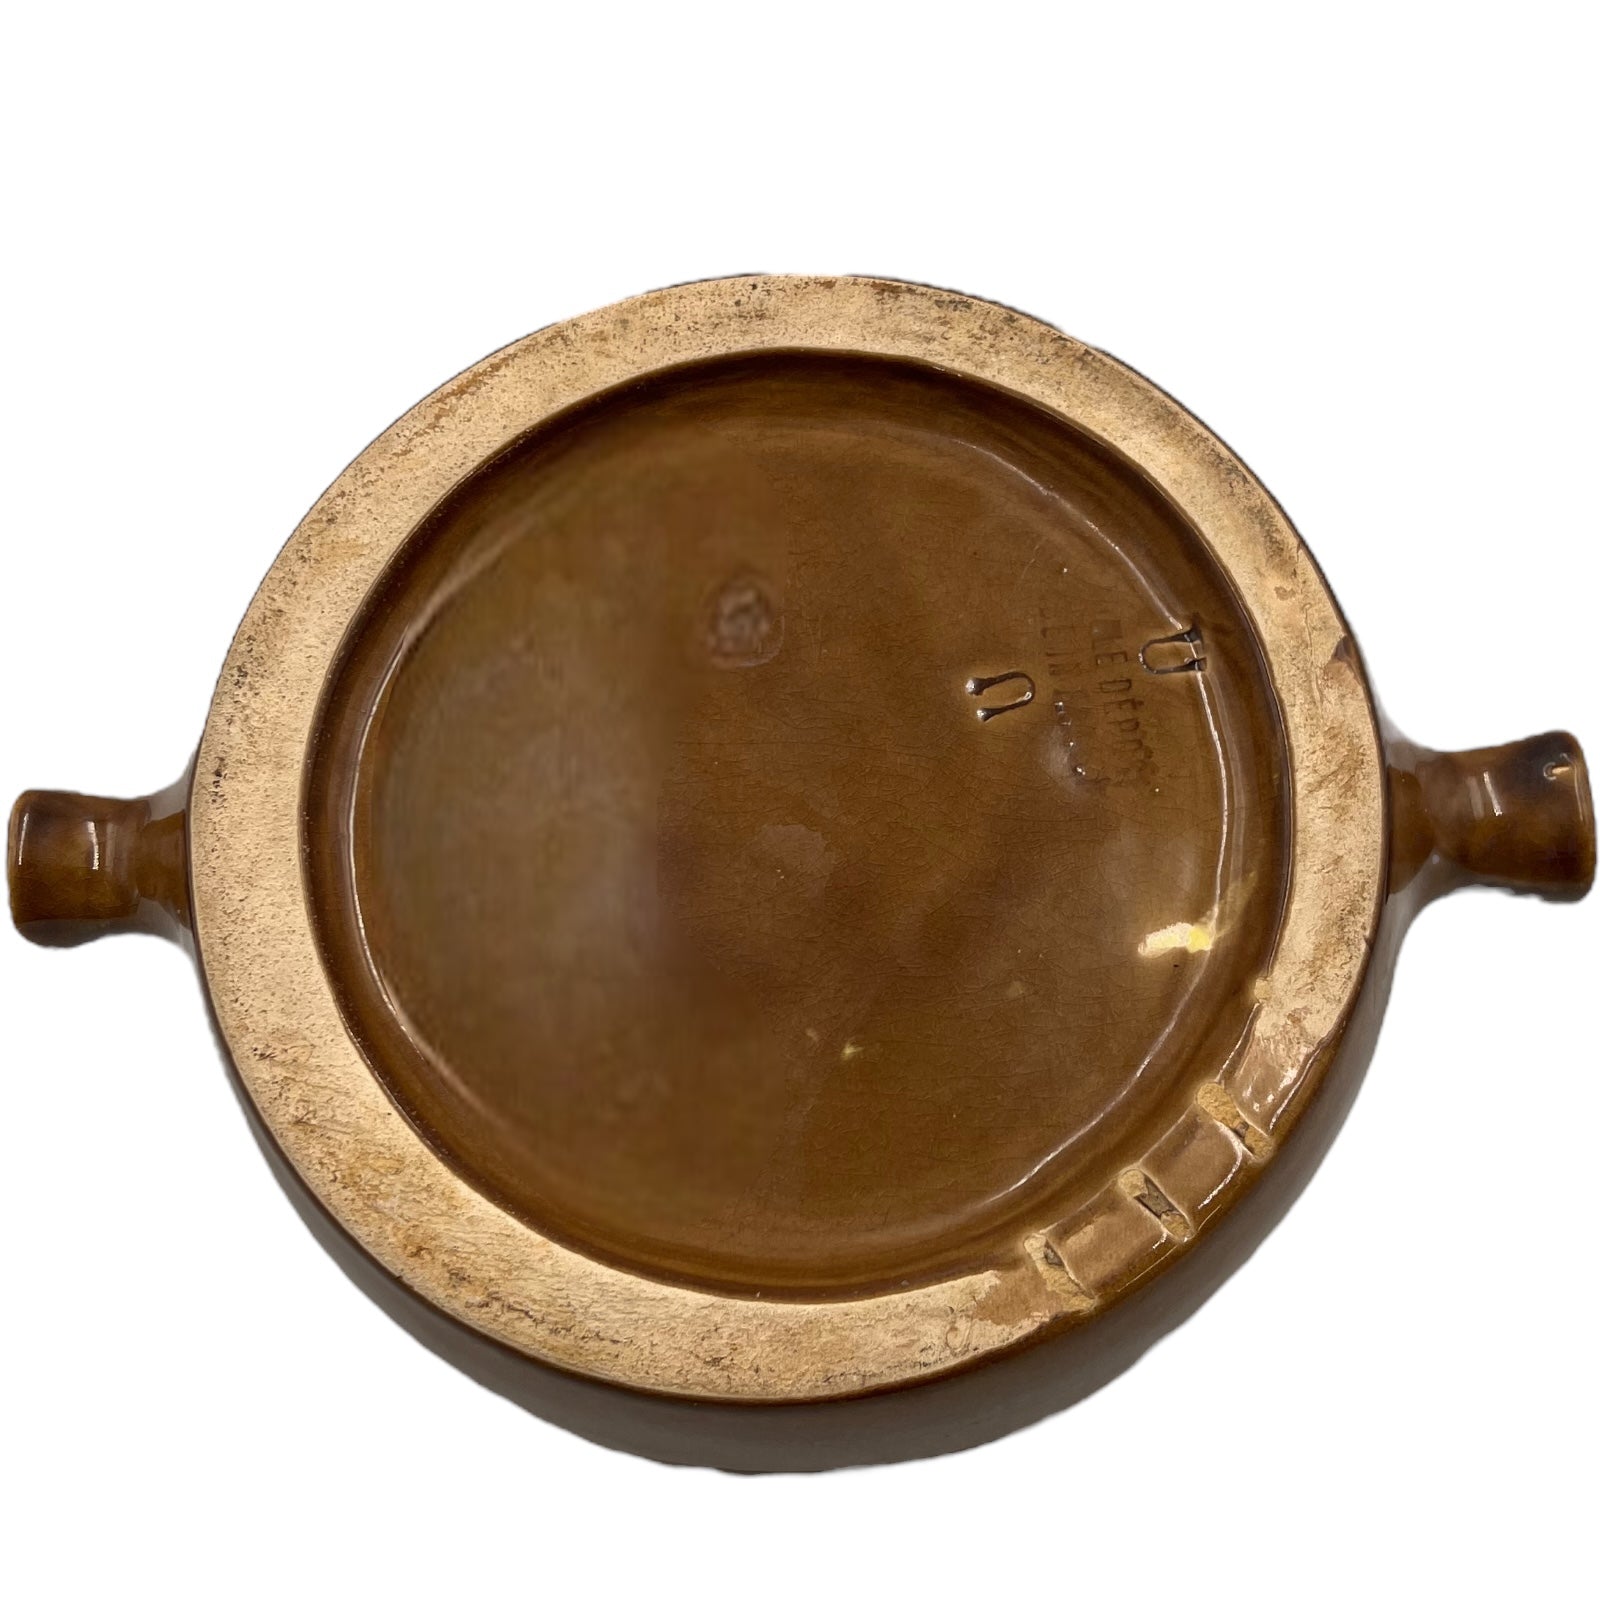 French rustic escargot snail plate with 12 holes